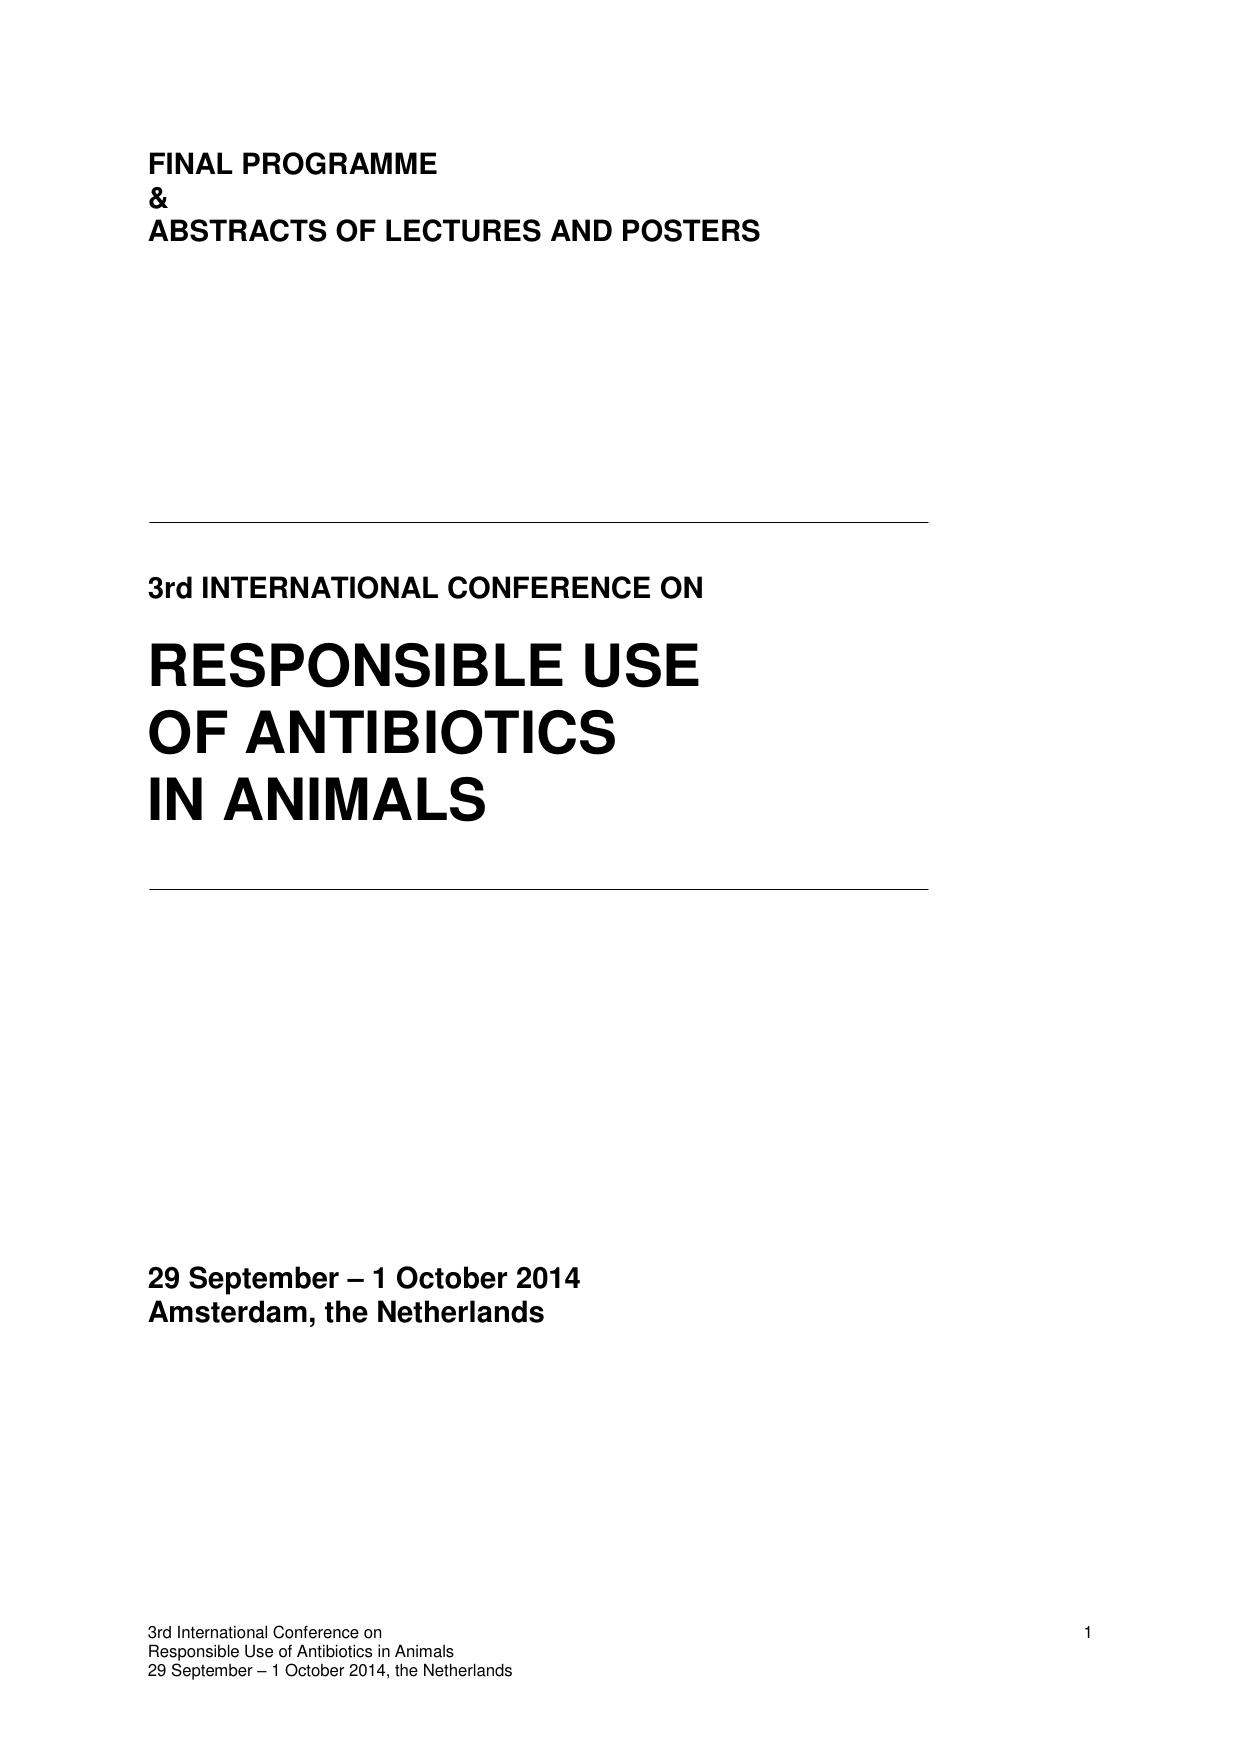 3rd INTERNATIONAL CONFERENCE ON RESPONSIBLE USE OF ANTIBIOTICS IN ANIMALS 2014